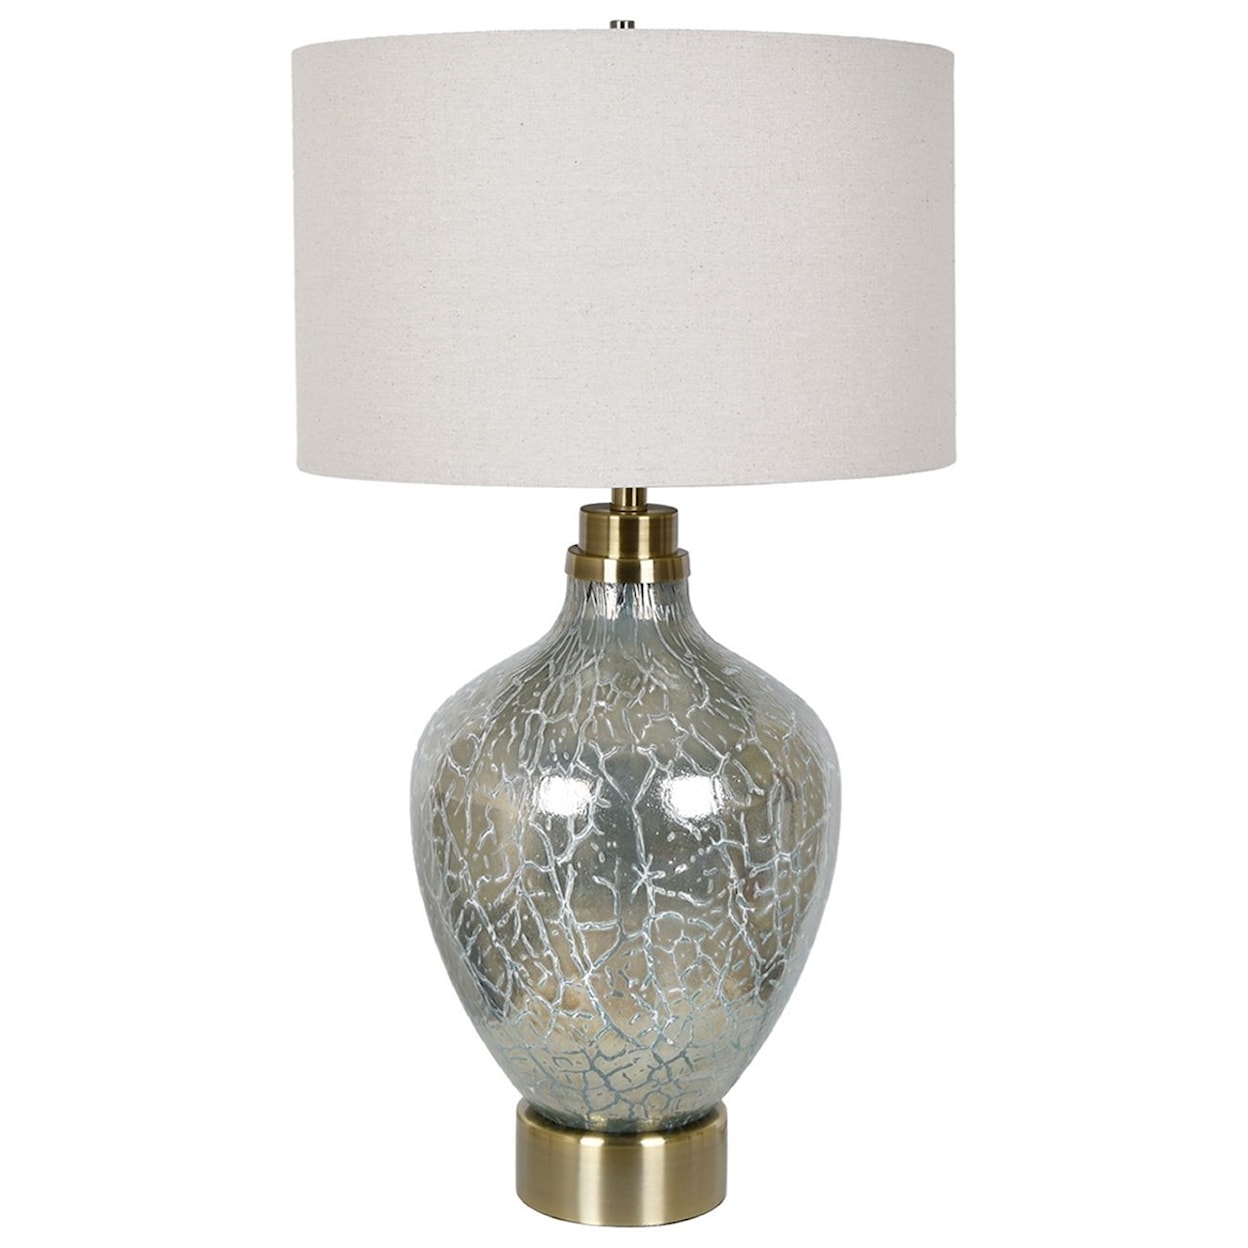 Crestview Collection Lighting Celest Table Lamp